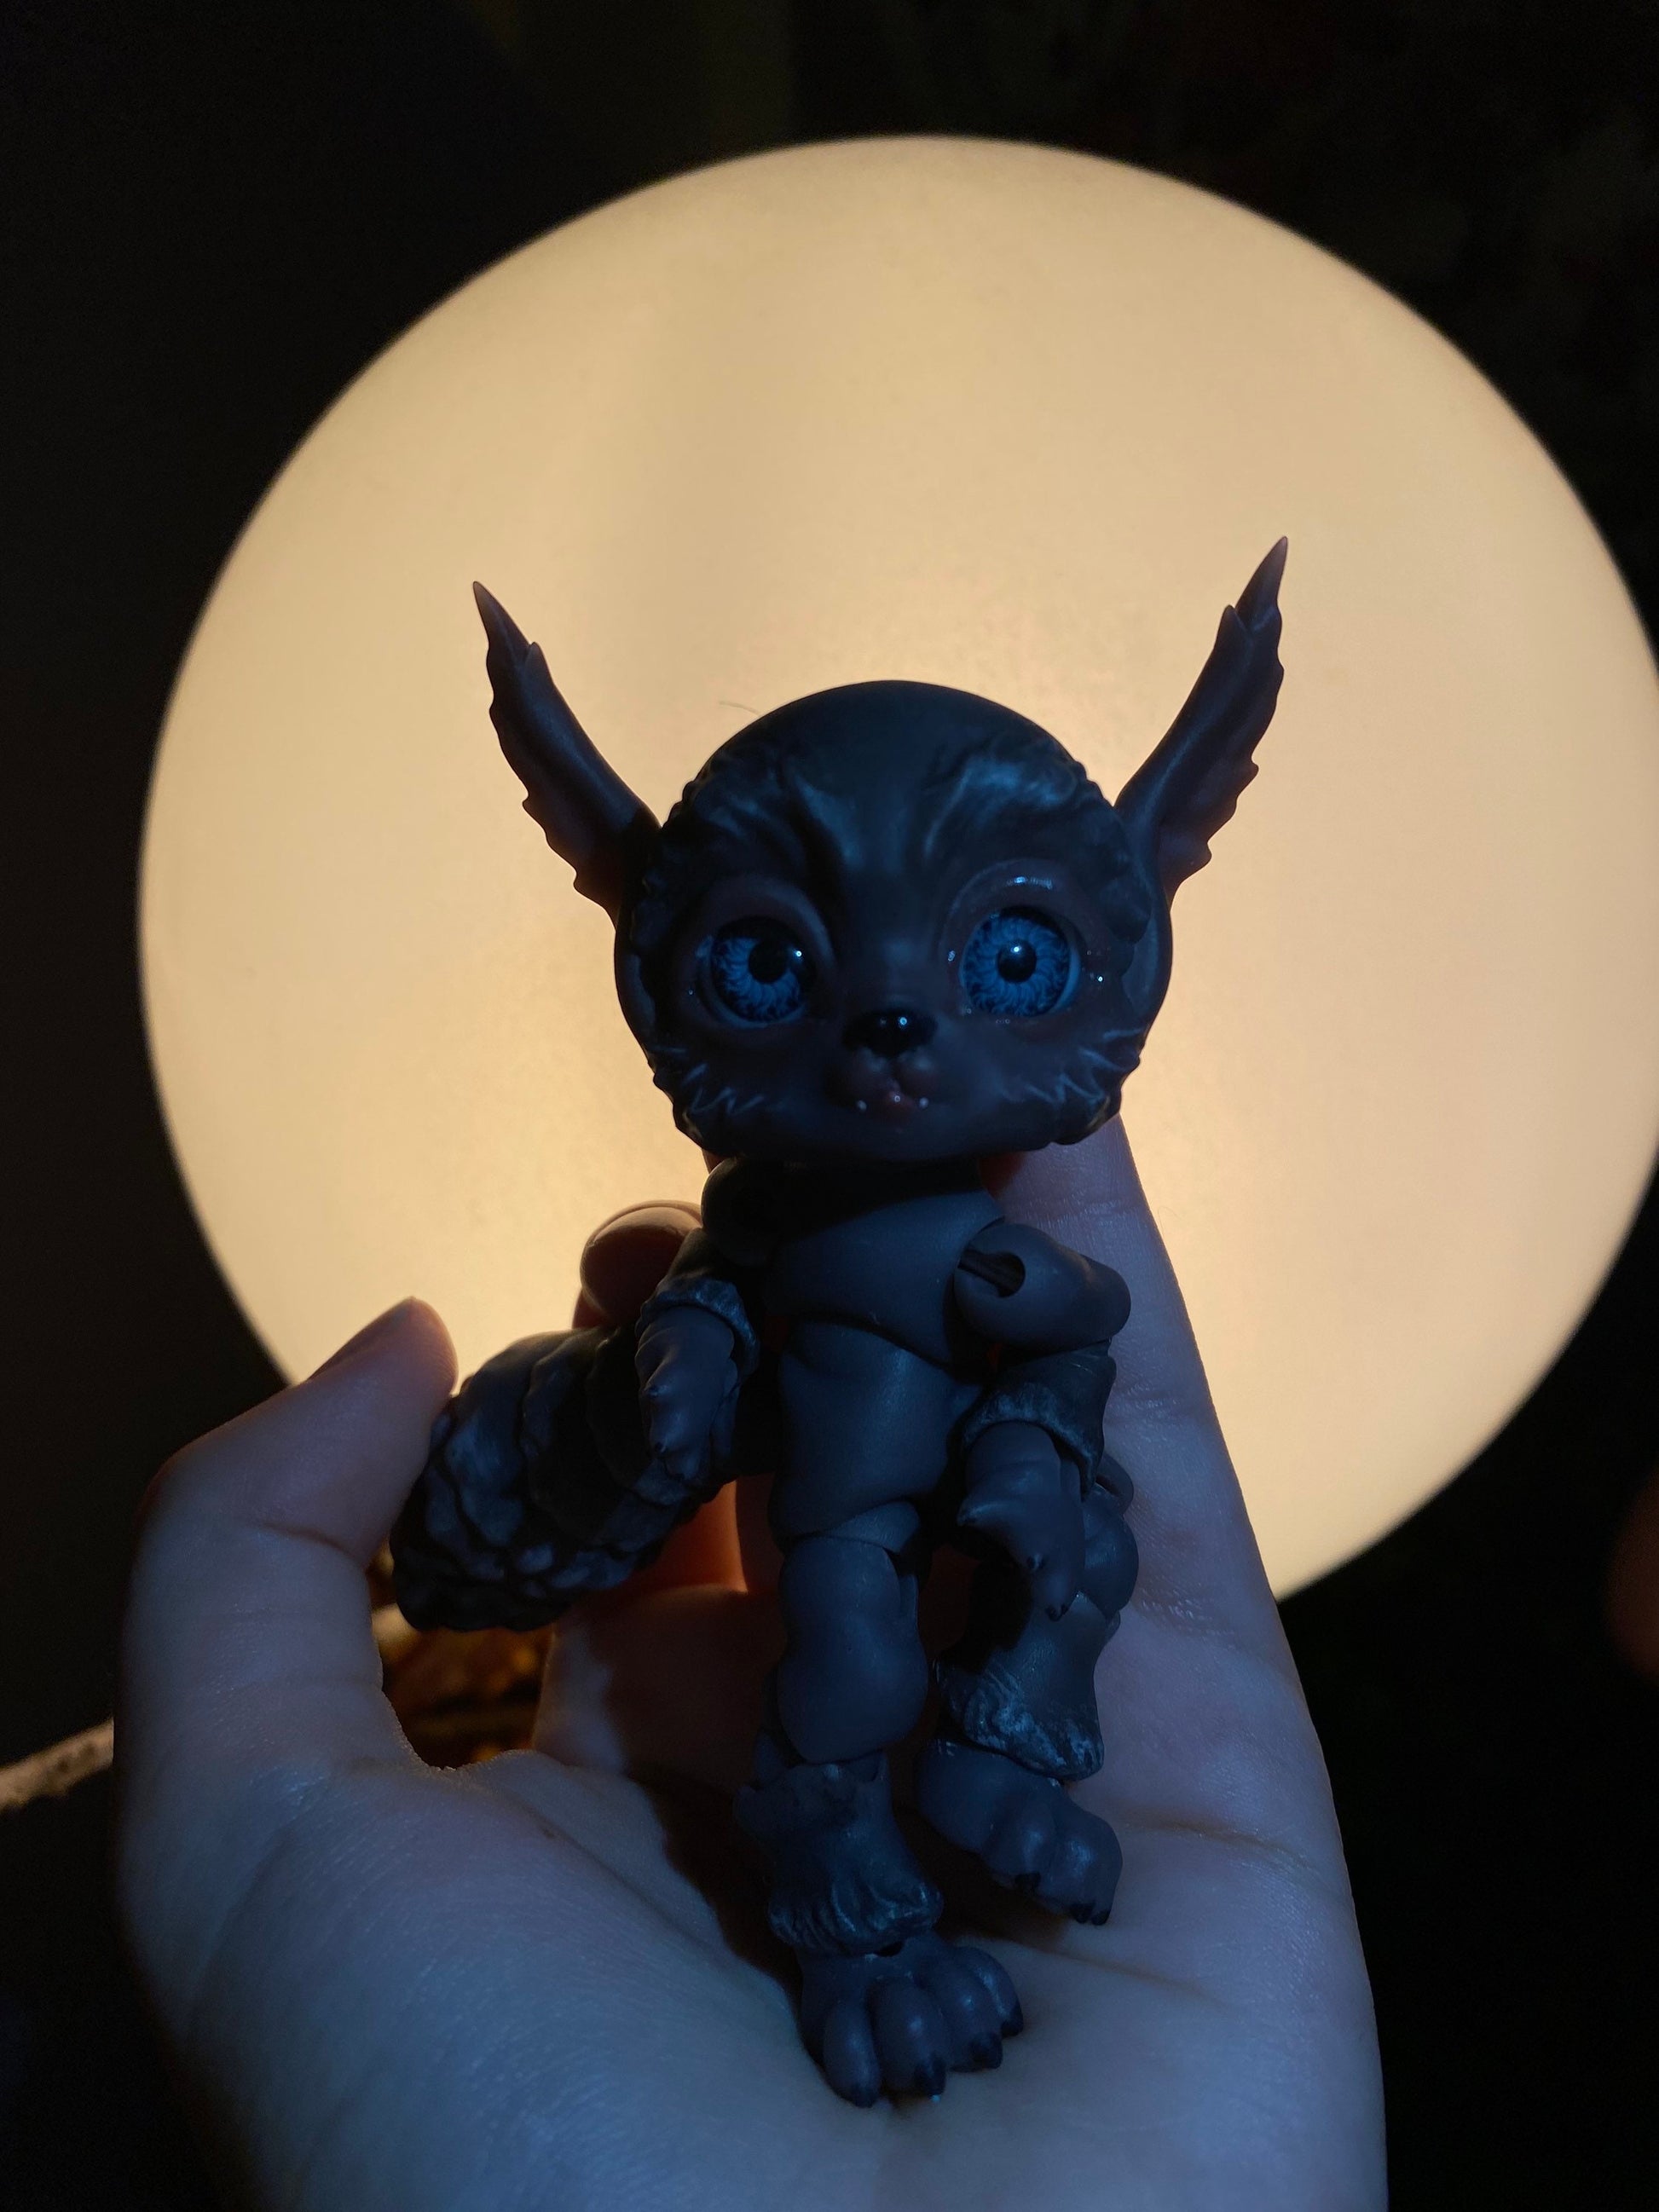 Werewolf! :The Tiny Wolfy Ball Jointed Doll